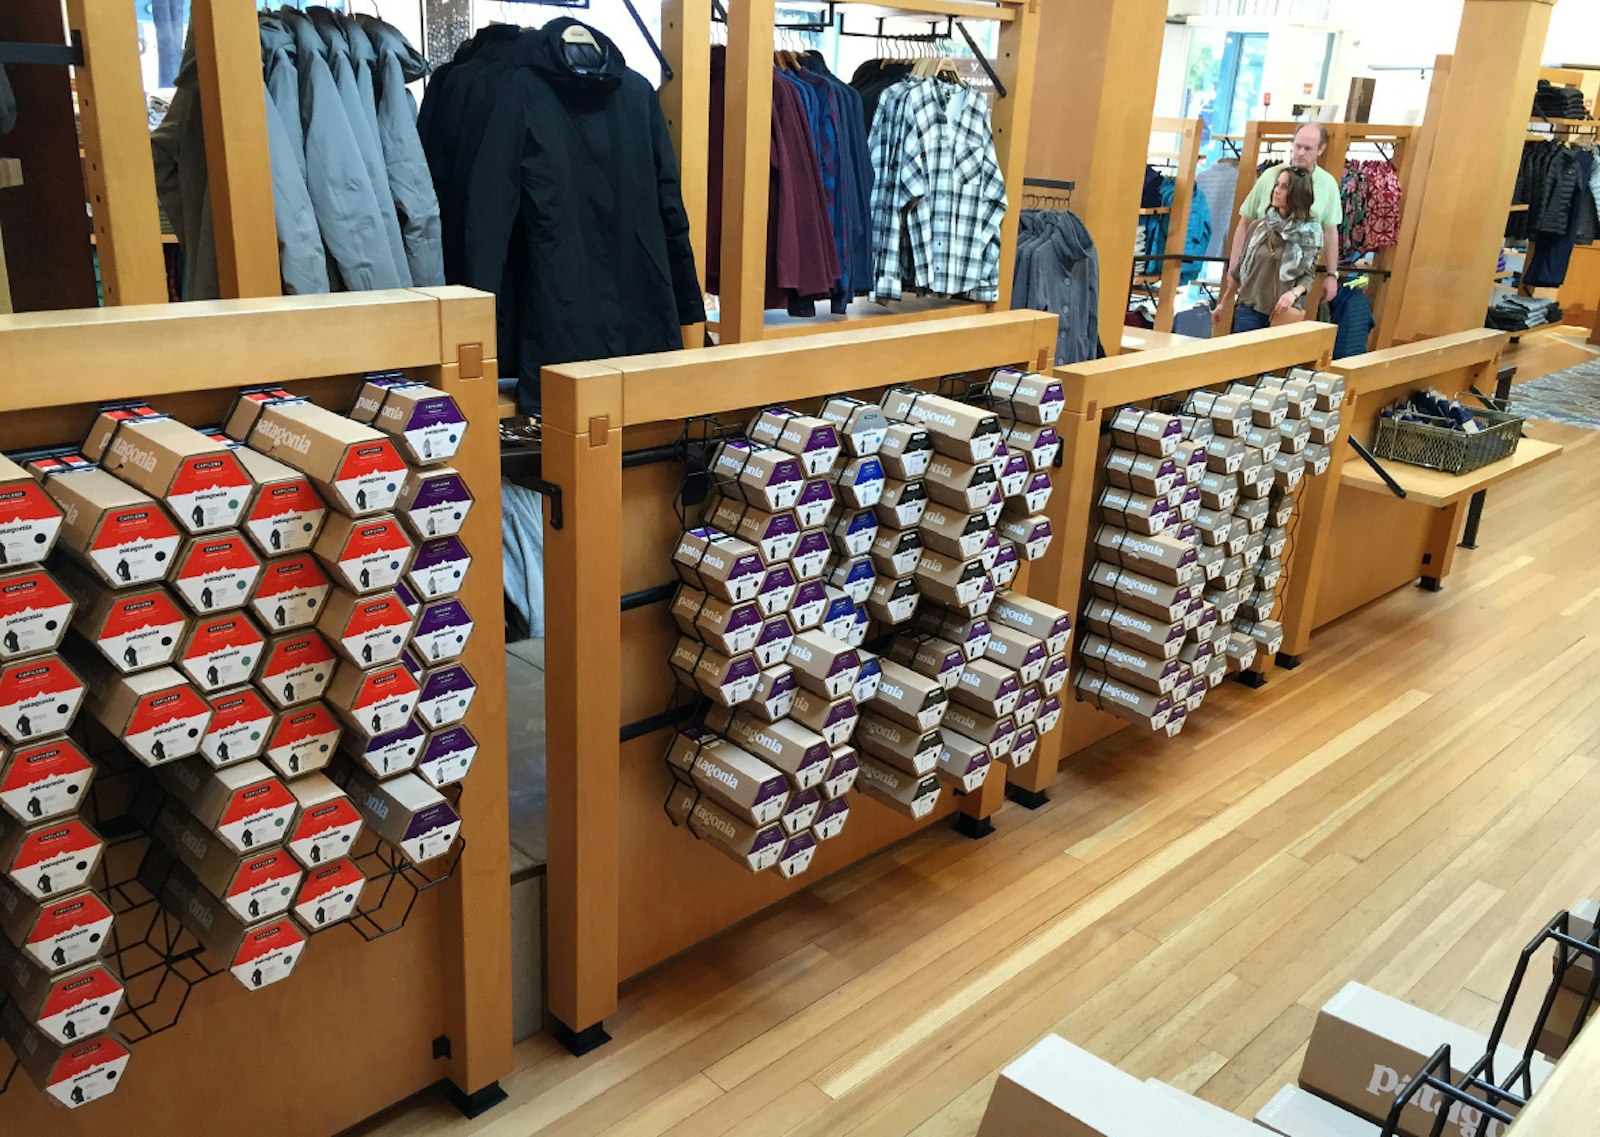 The Patagonia brand packaging design retail display in store with wood floors.